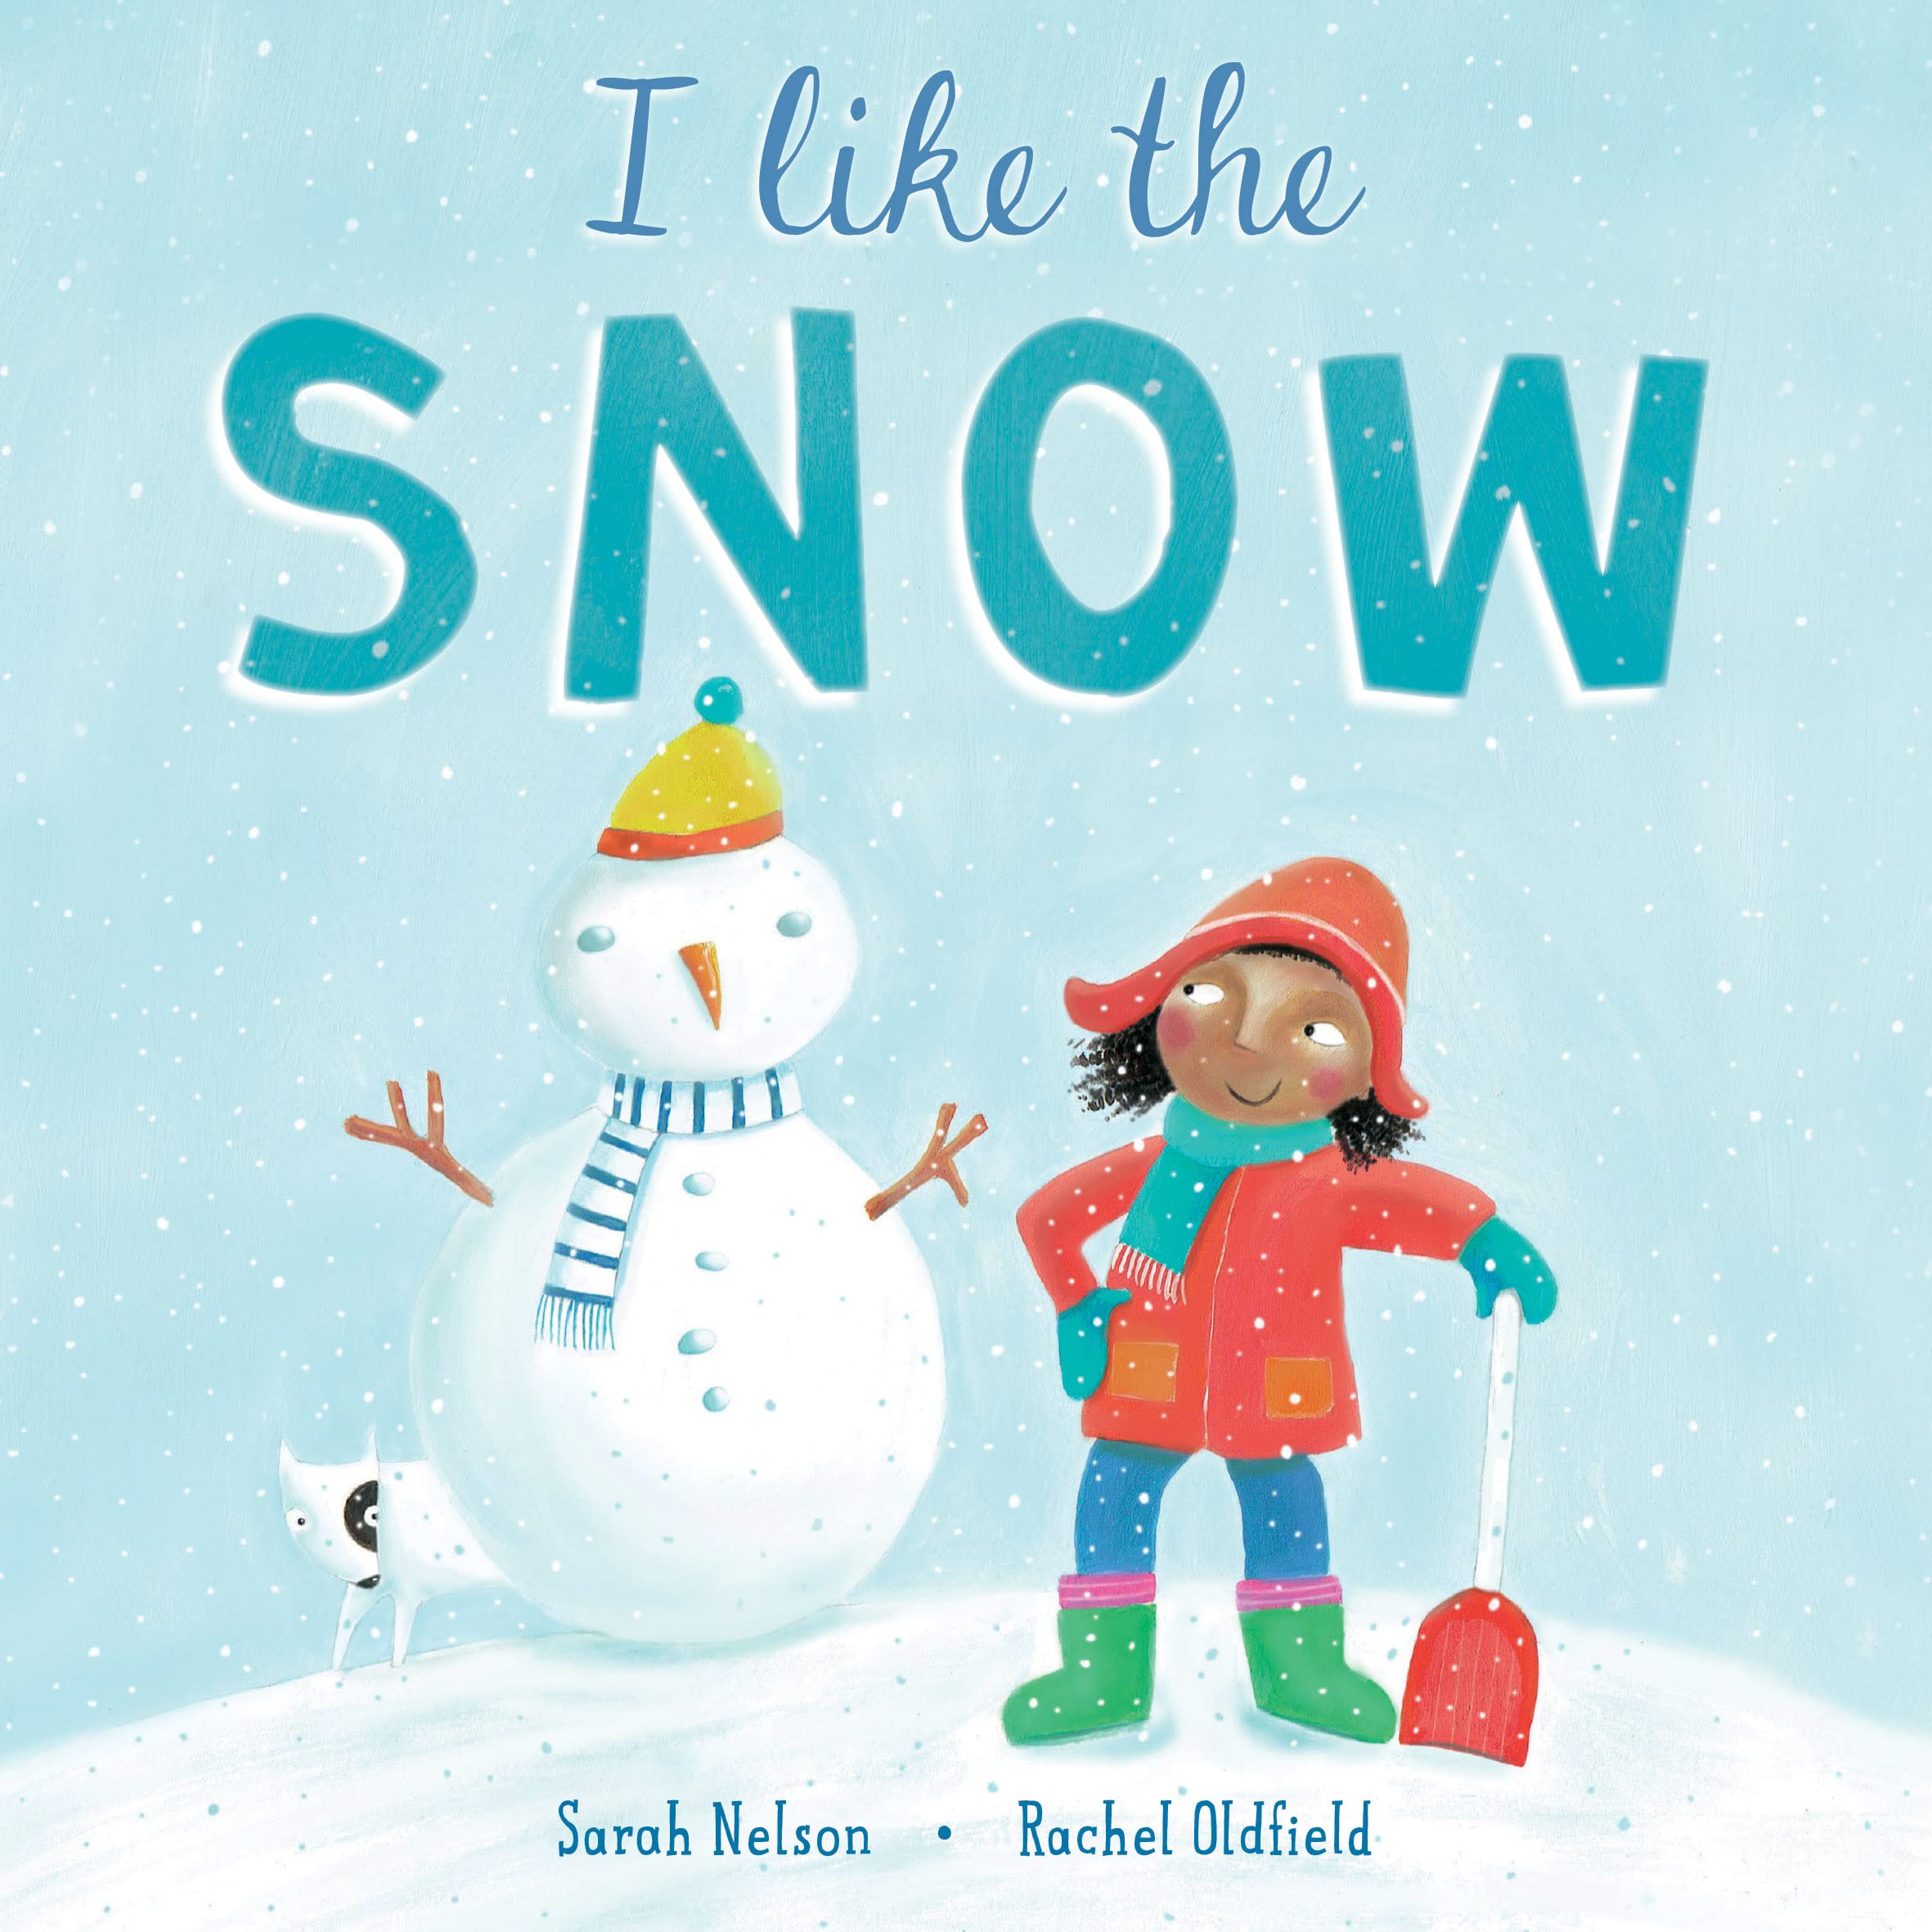 Book Cover: I like the Snow showing a young person standing next to a snowman they've built with a shovel and a dog